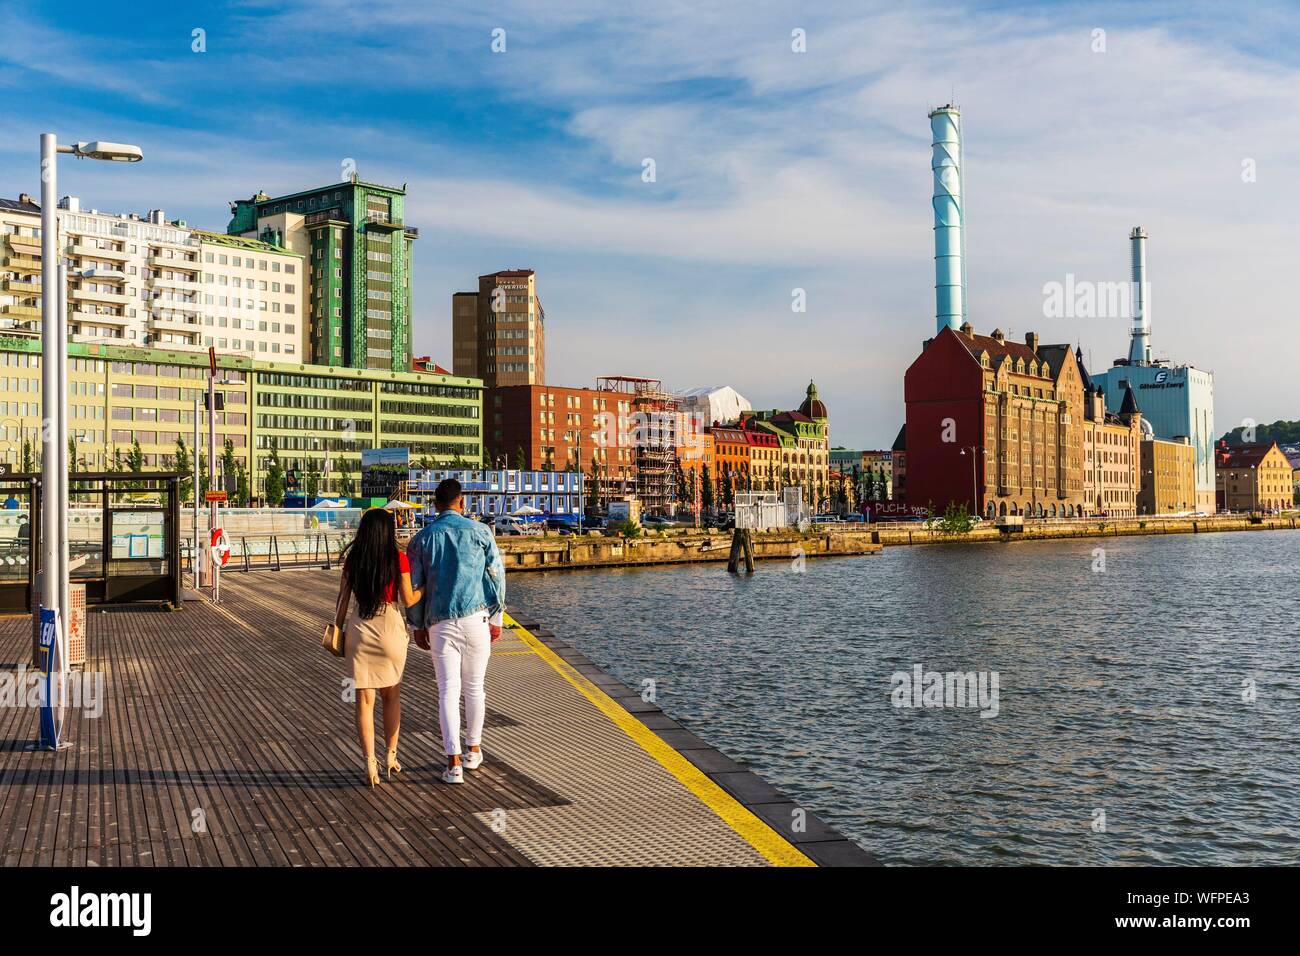 Sweden, Vastra Gotaland, Goteborg (Gothenburg), view of the thermal power plant of the city from the dock of Stenpiren Stock Photo